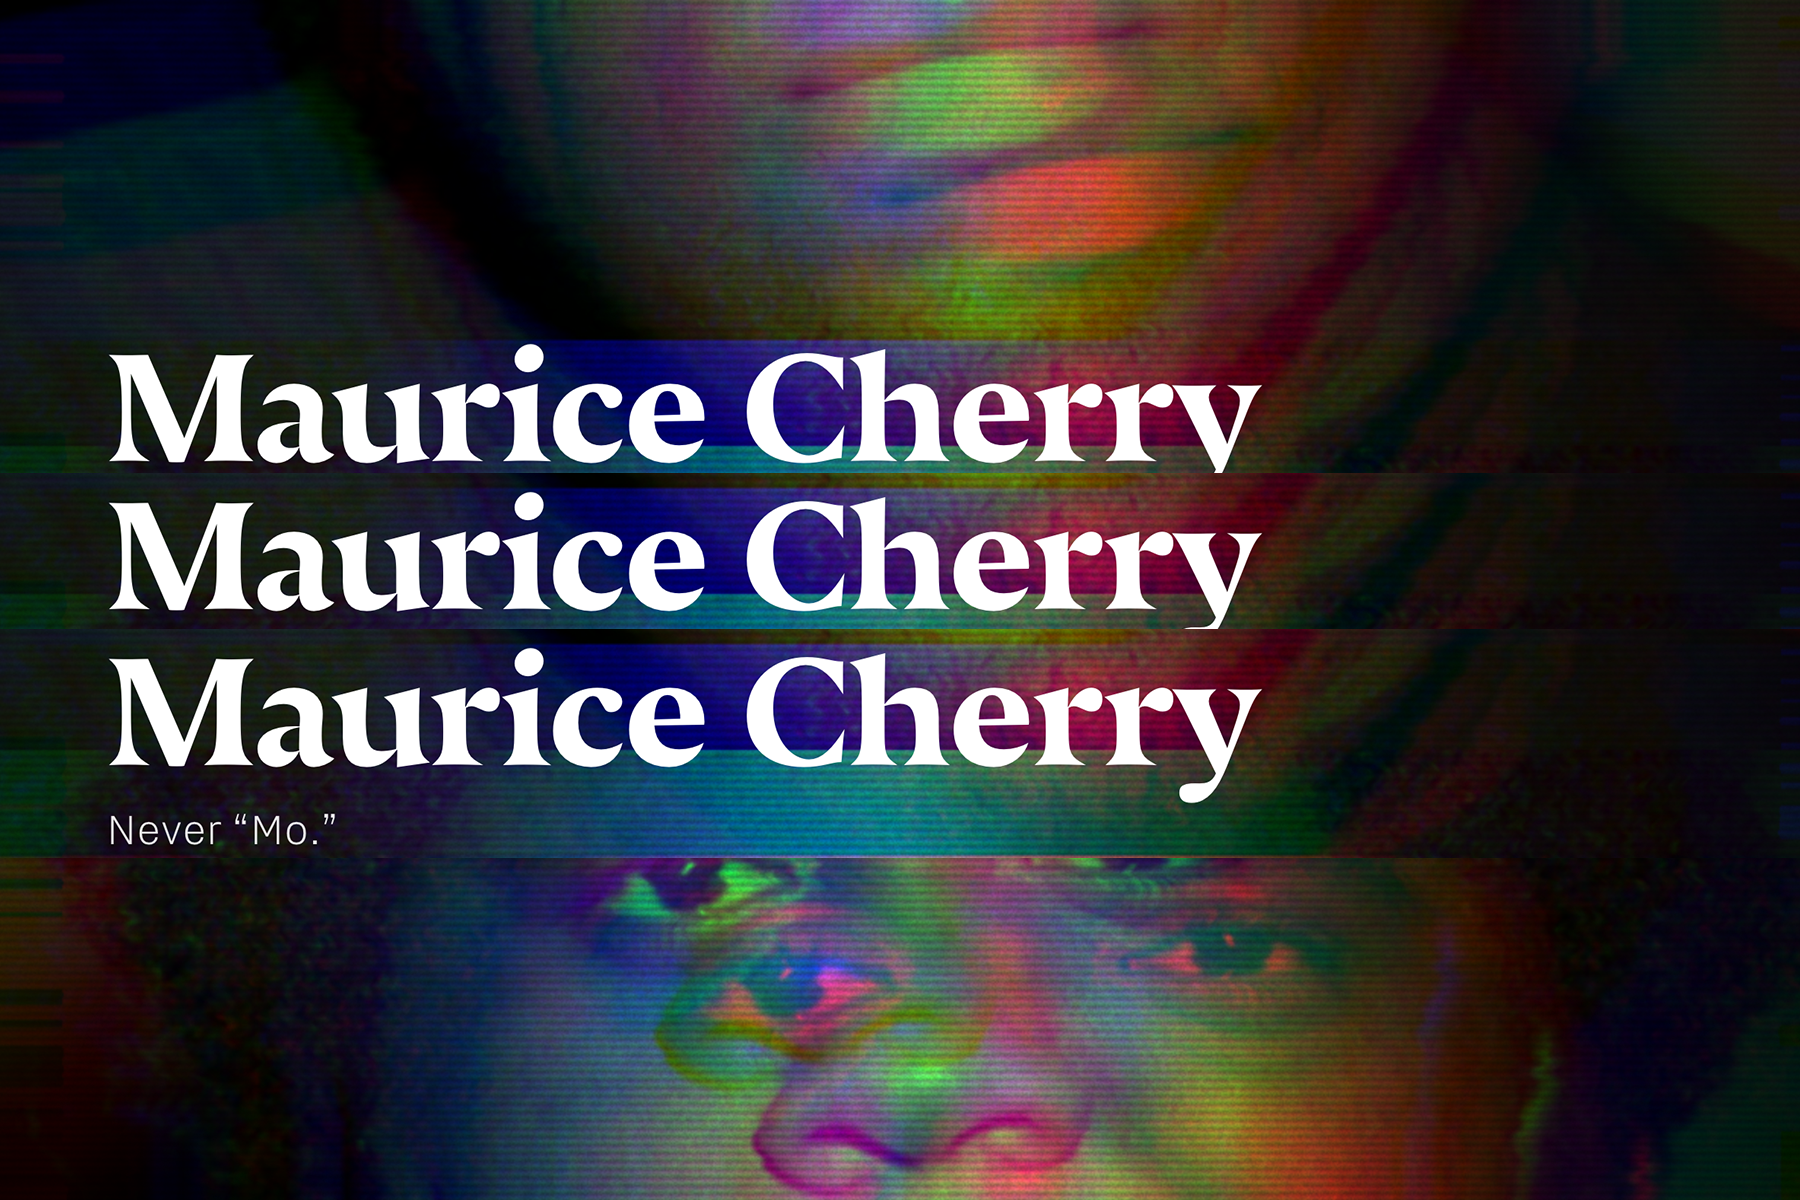 Maurice Cherry Lecture